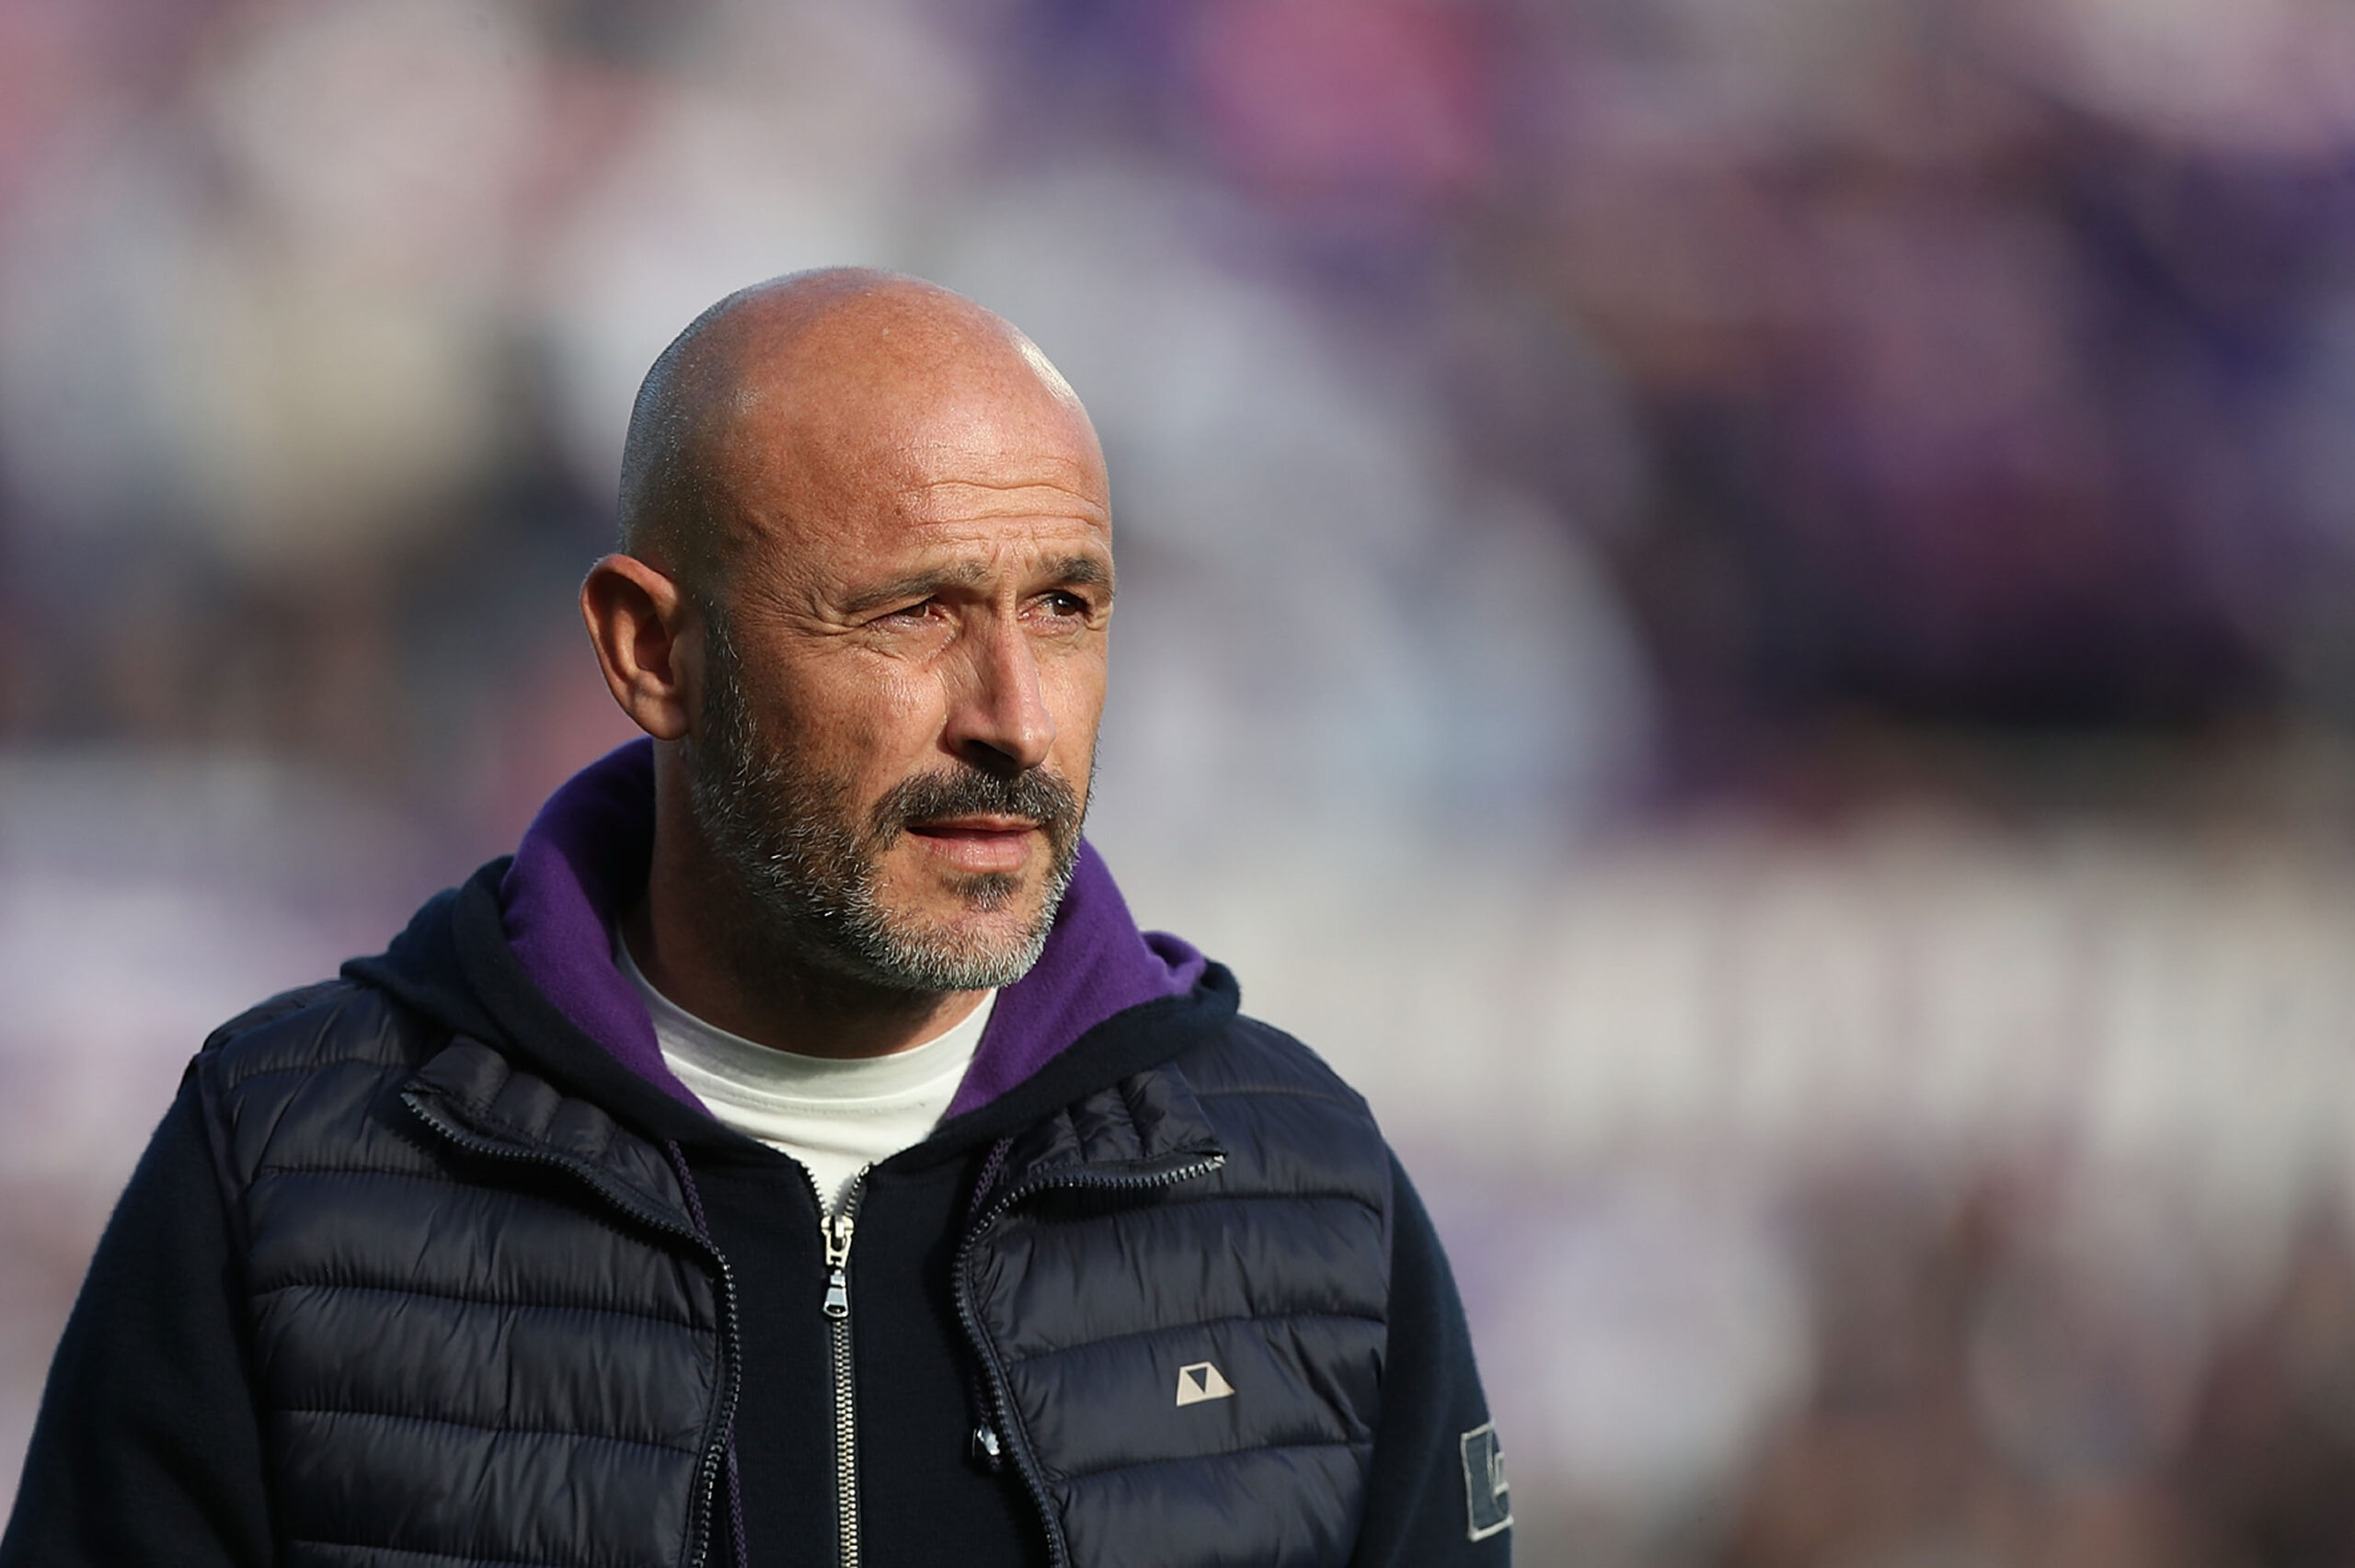 Serie A is headed for an extra busy coaching carousel at the end of the season. Very few coaches are already certain to stay put.